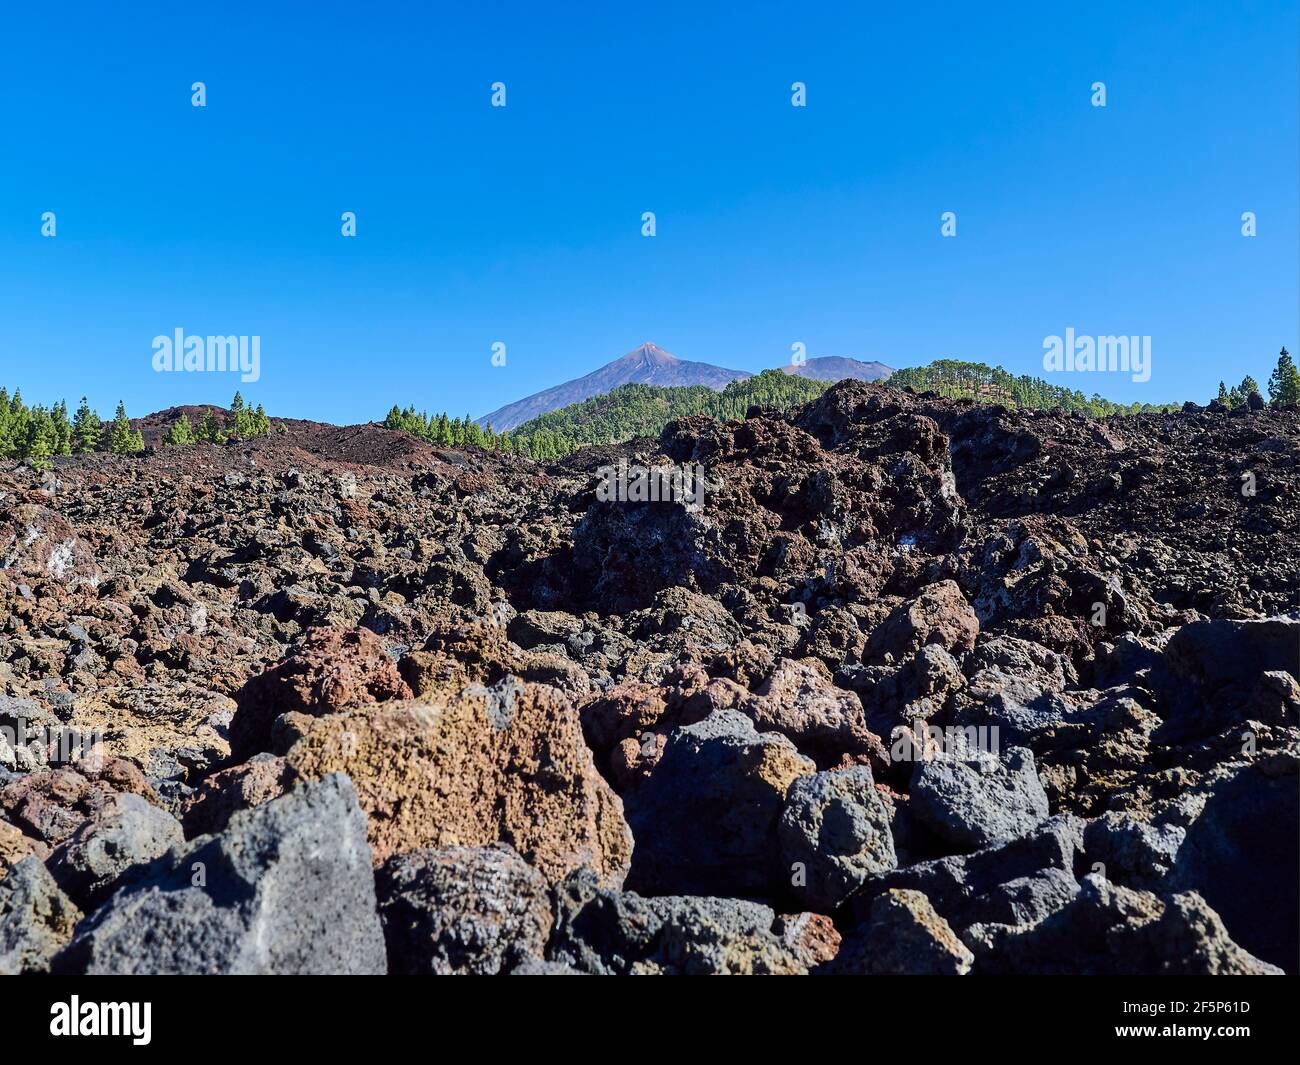 El Teide is a volcano and the highest peak on the island of tenerife, Spain. A popular travel destination for hiking and trekking. Stock Photo